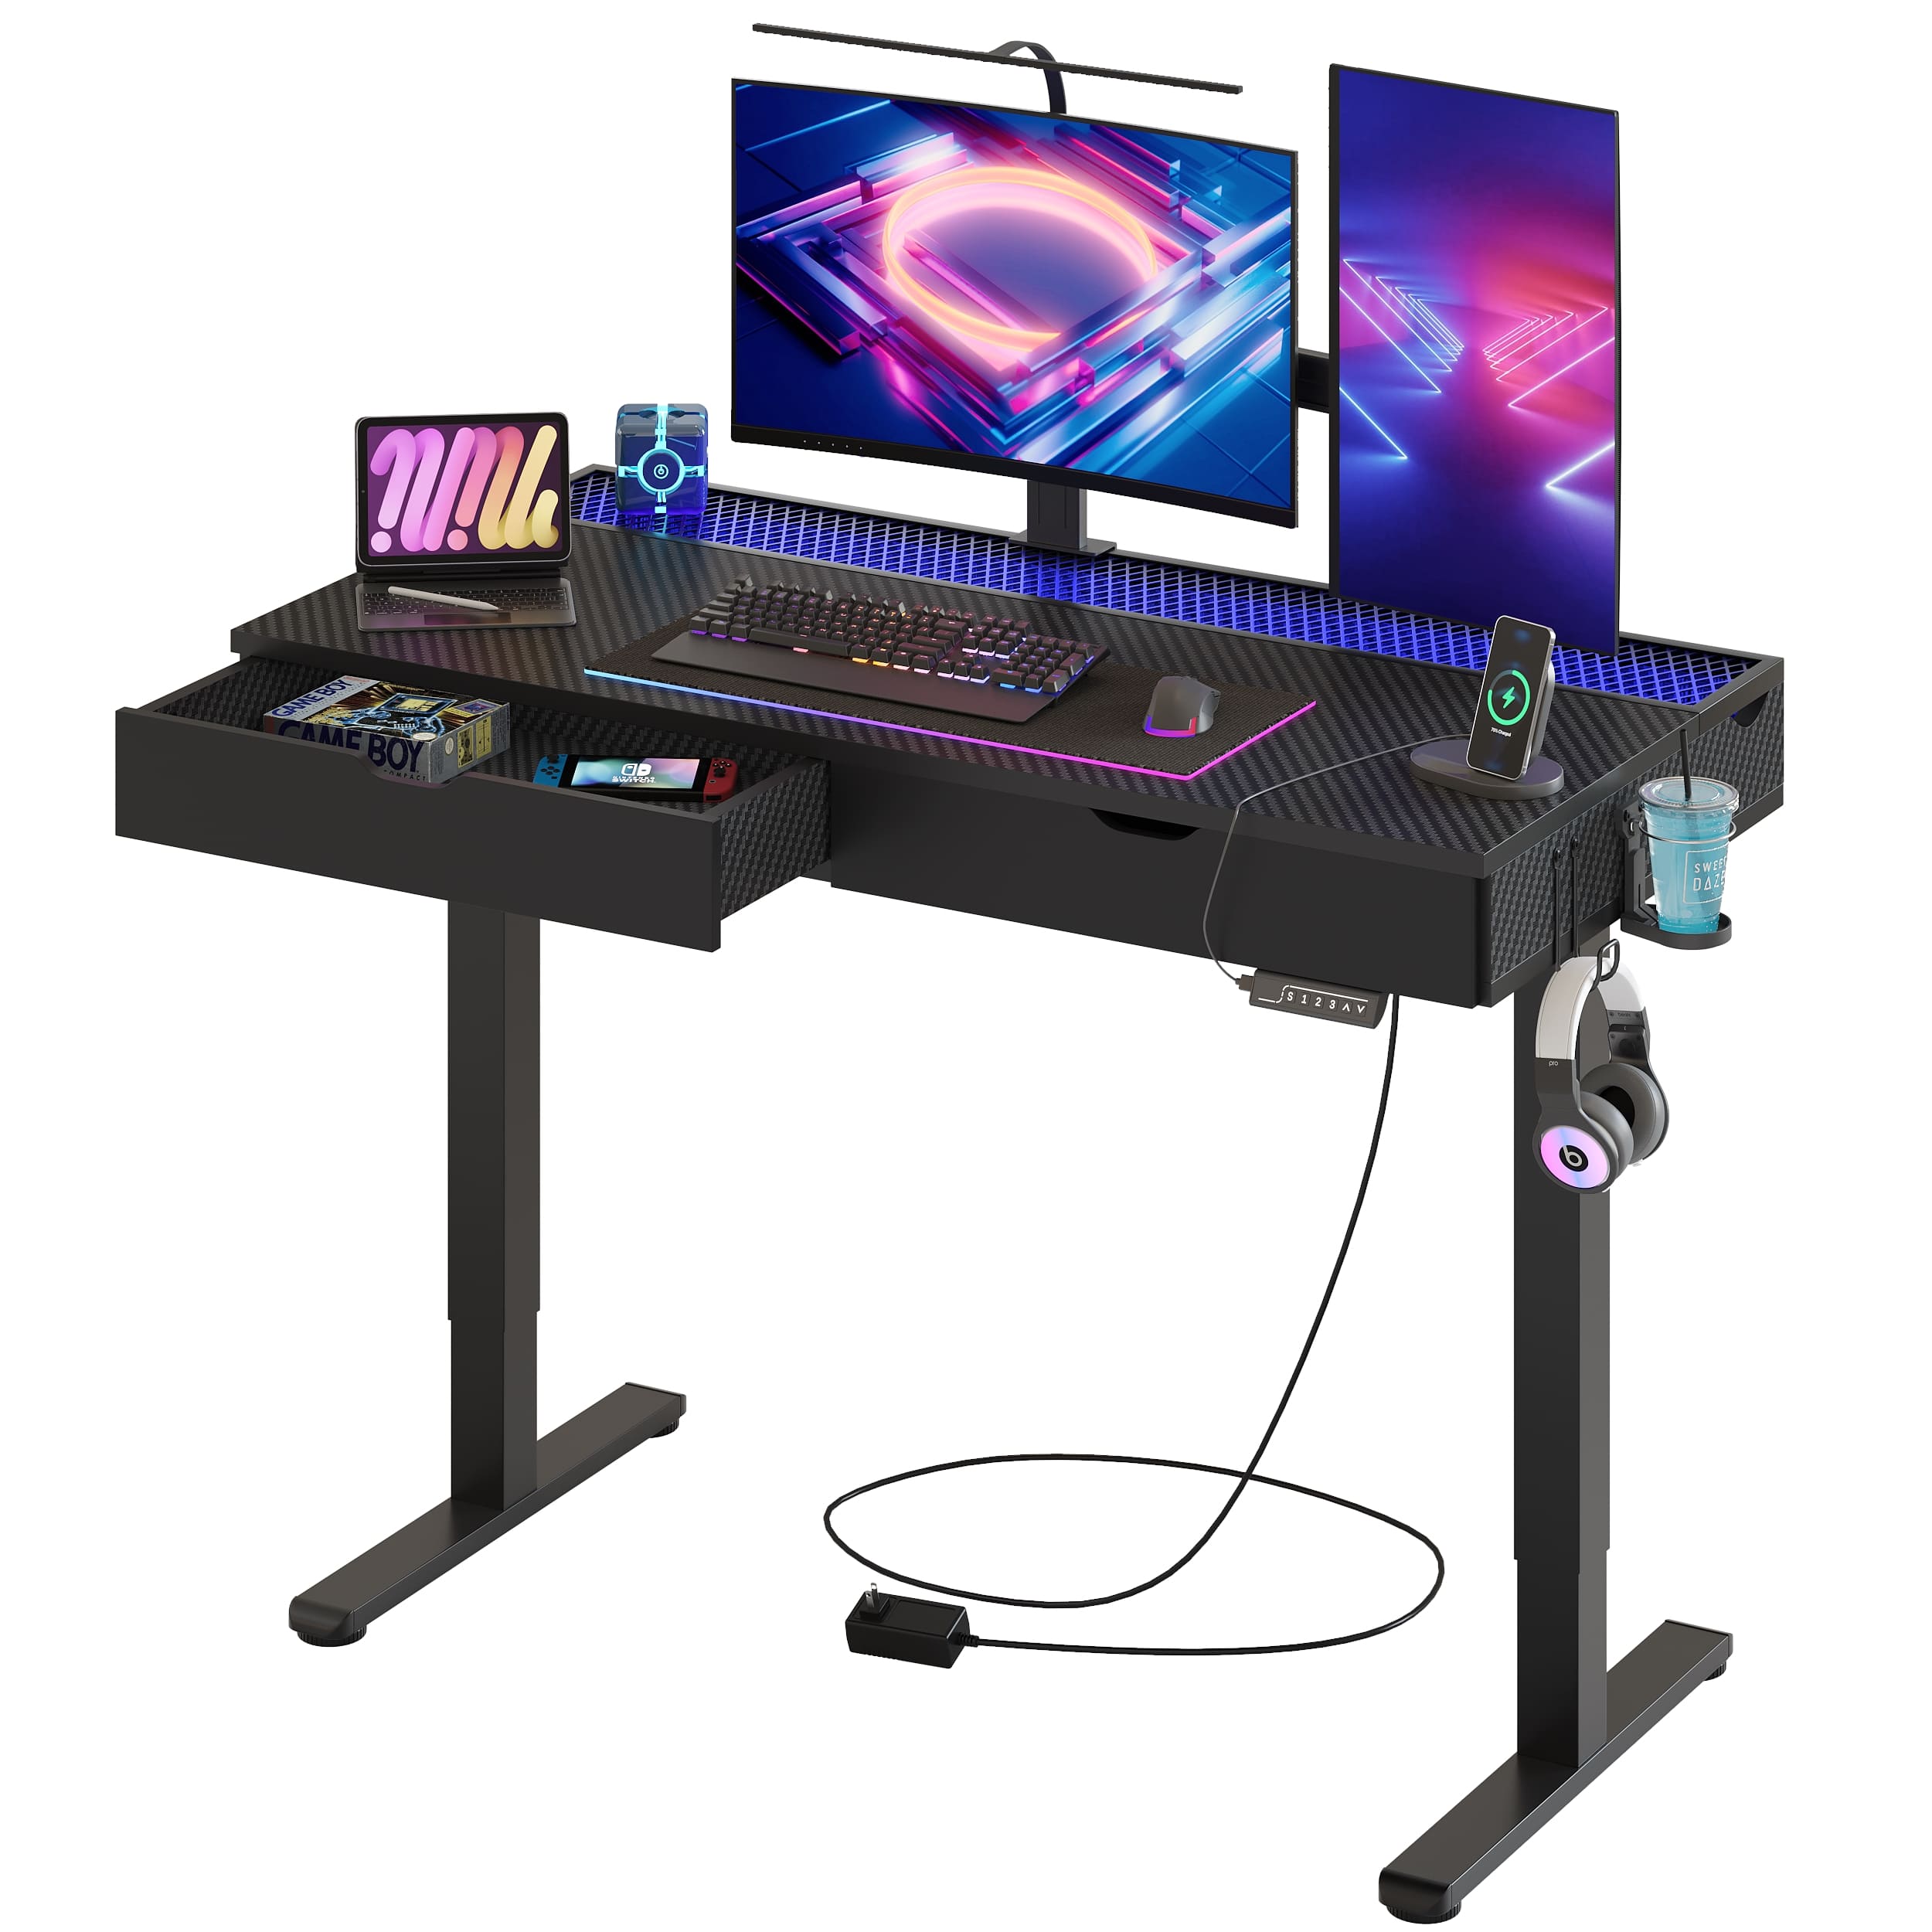 the black carbon fiber standing desk with drawers in the white background